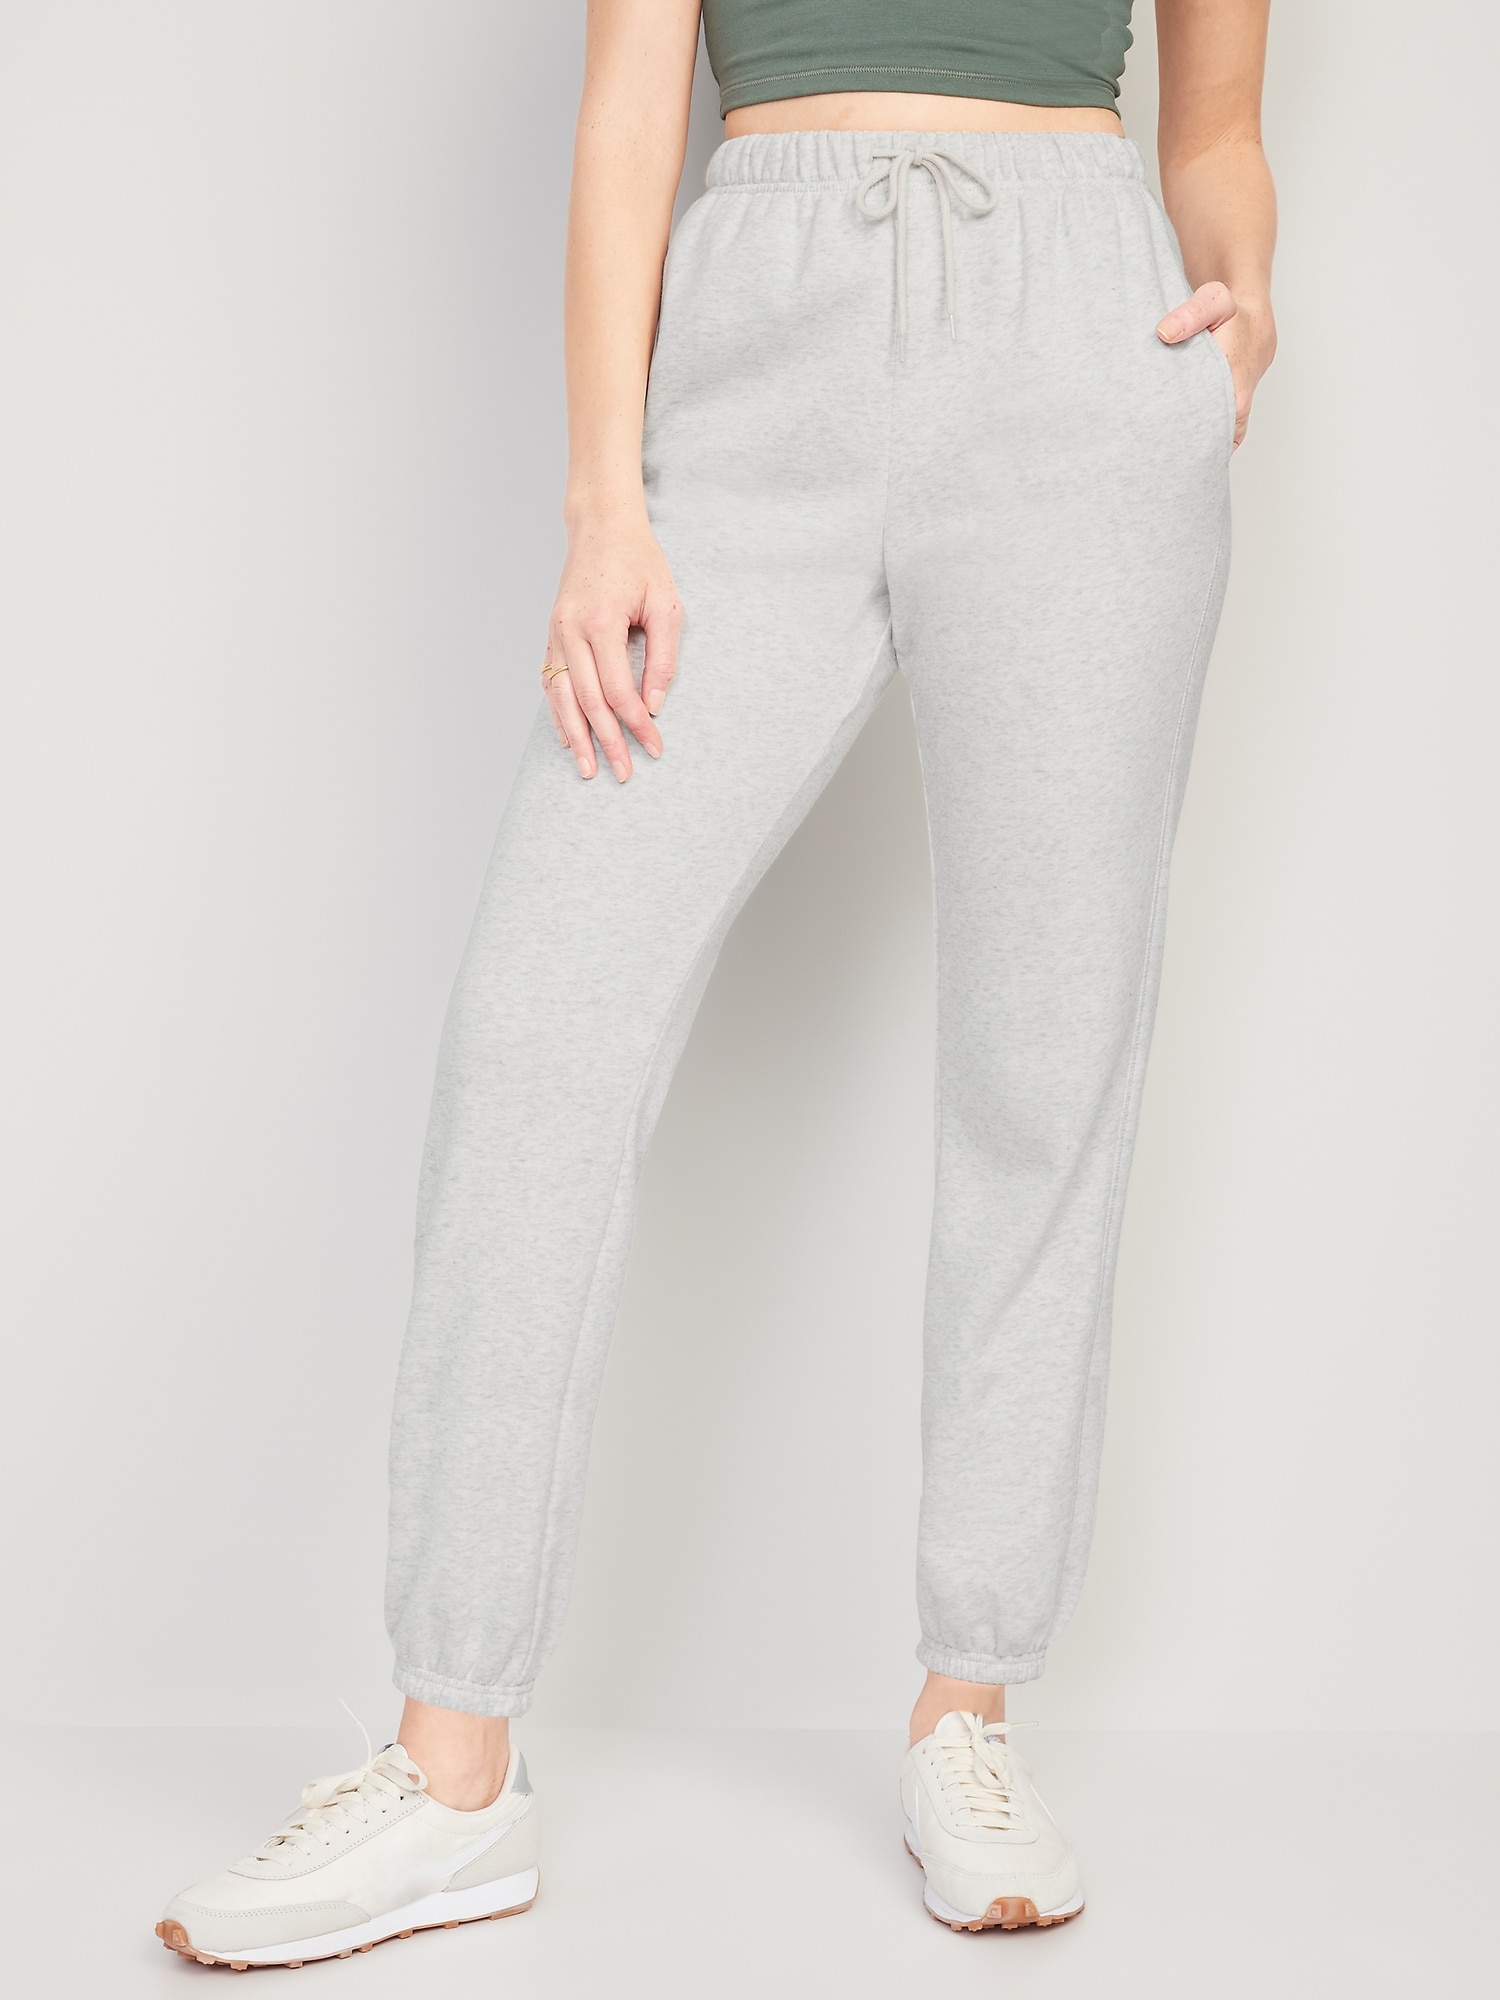 High-Rise Vintage Jogger Sweatpants - Wild Fable Heather Gray XS 1 ct